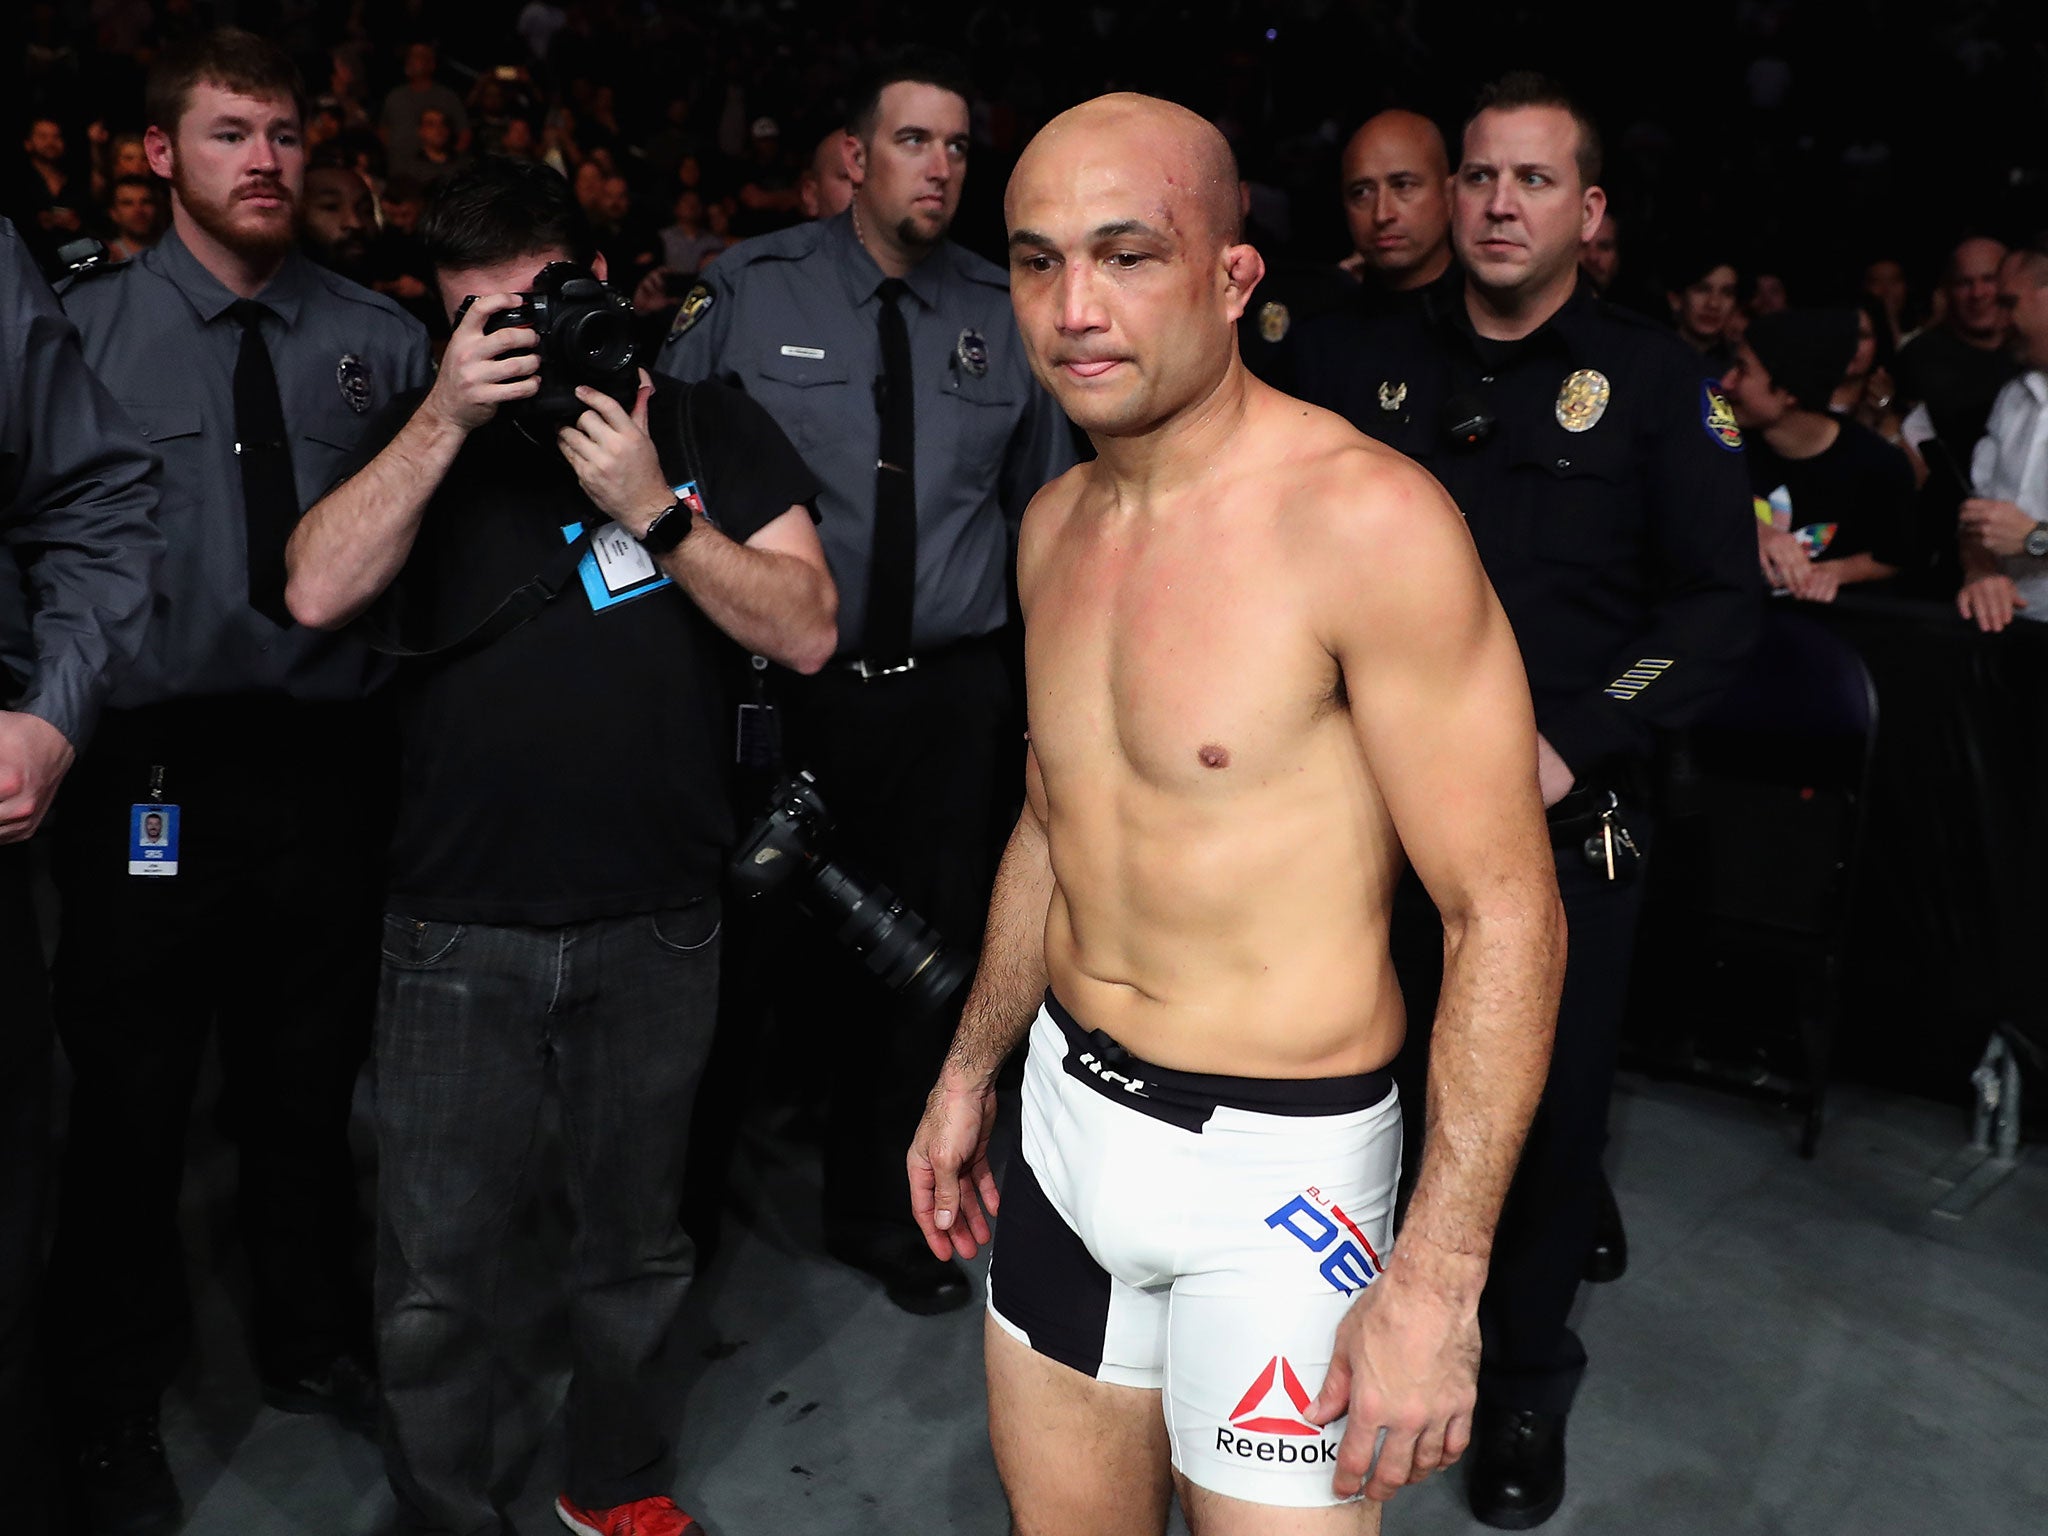 BJ Penn's return to the UFC ended in a comprehensive defeat